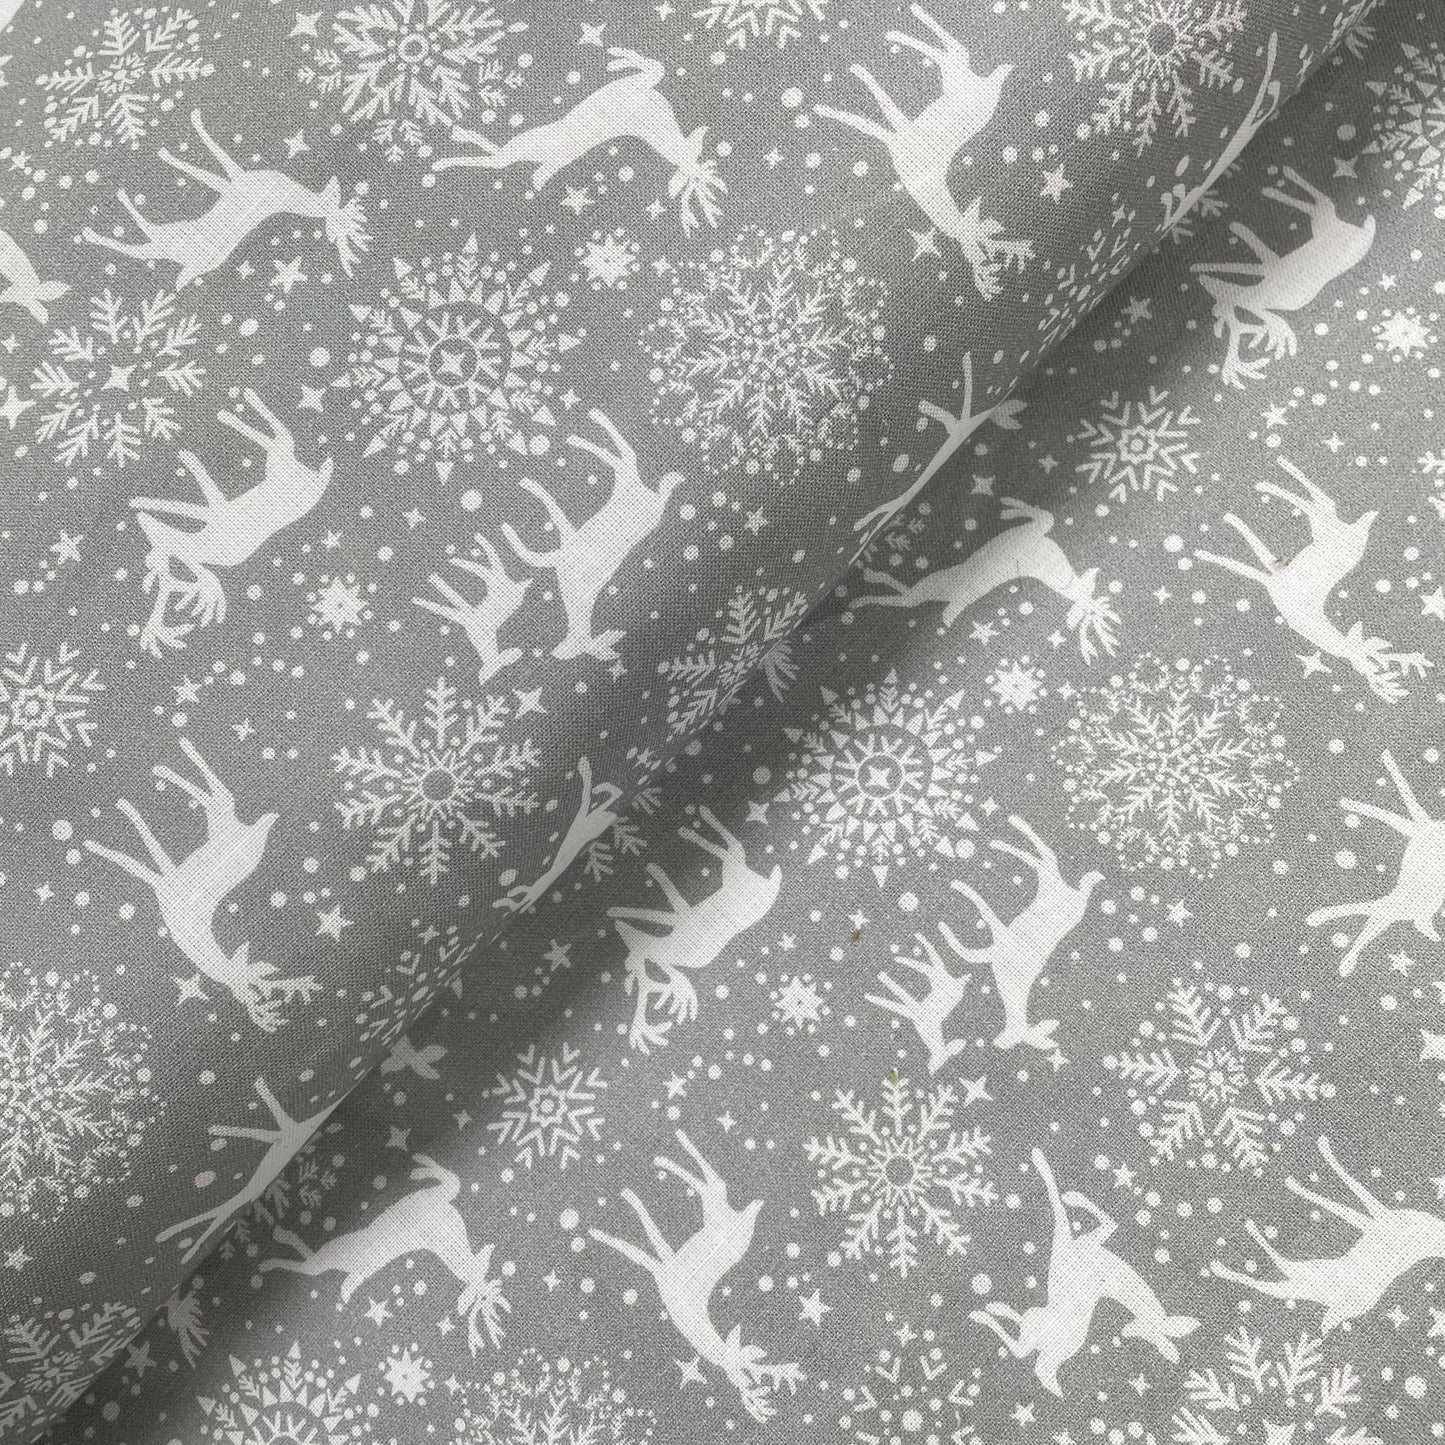 Crafty Fabrics Snowflakes and Reindeers on Navy, Grey or Red Christmas 100% Craft Cotton Fabric